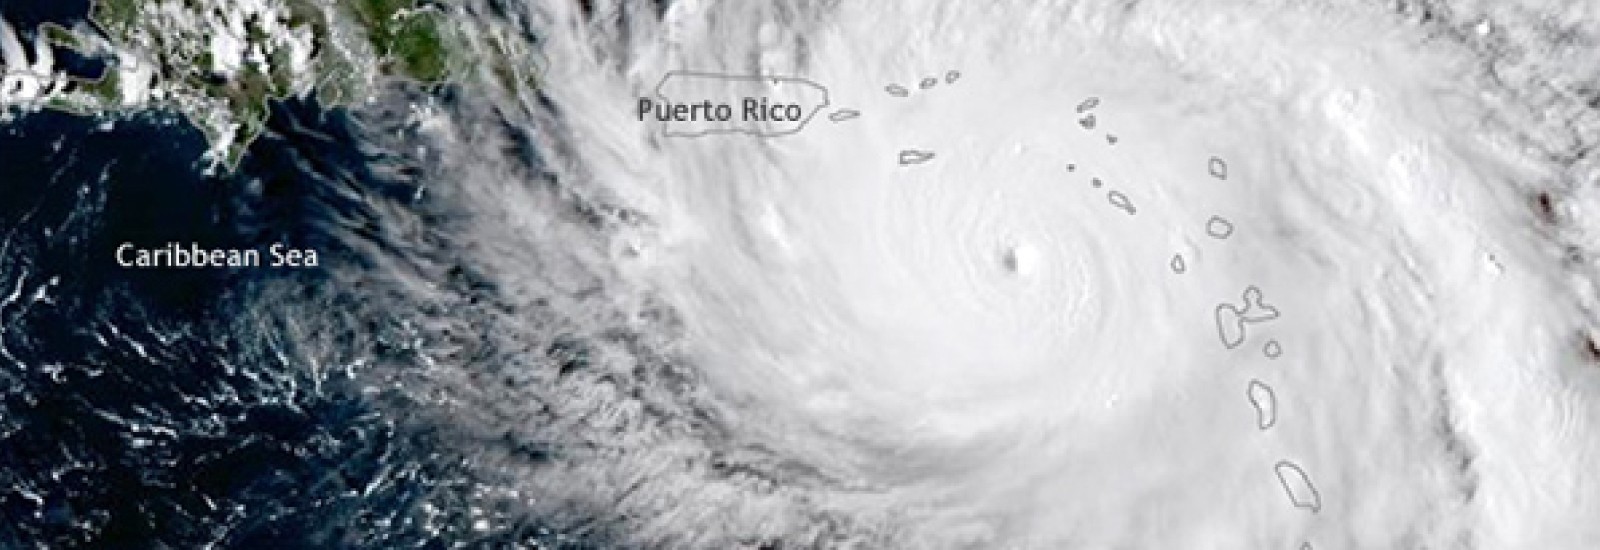 Hurricane Maria approaching Puerto Rico on September 19, 2017. Image by Tim Loomis, National Oceanic and Atmospheric Administration Satellites group. 